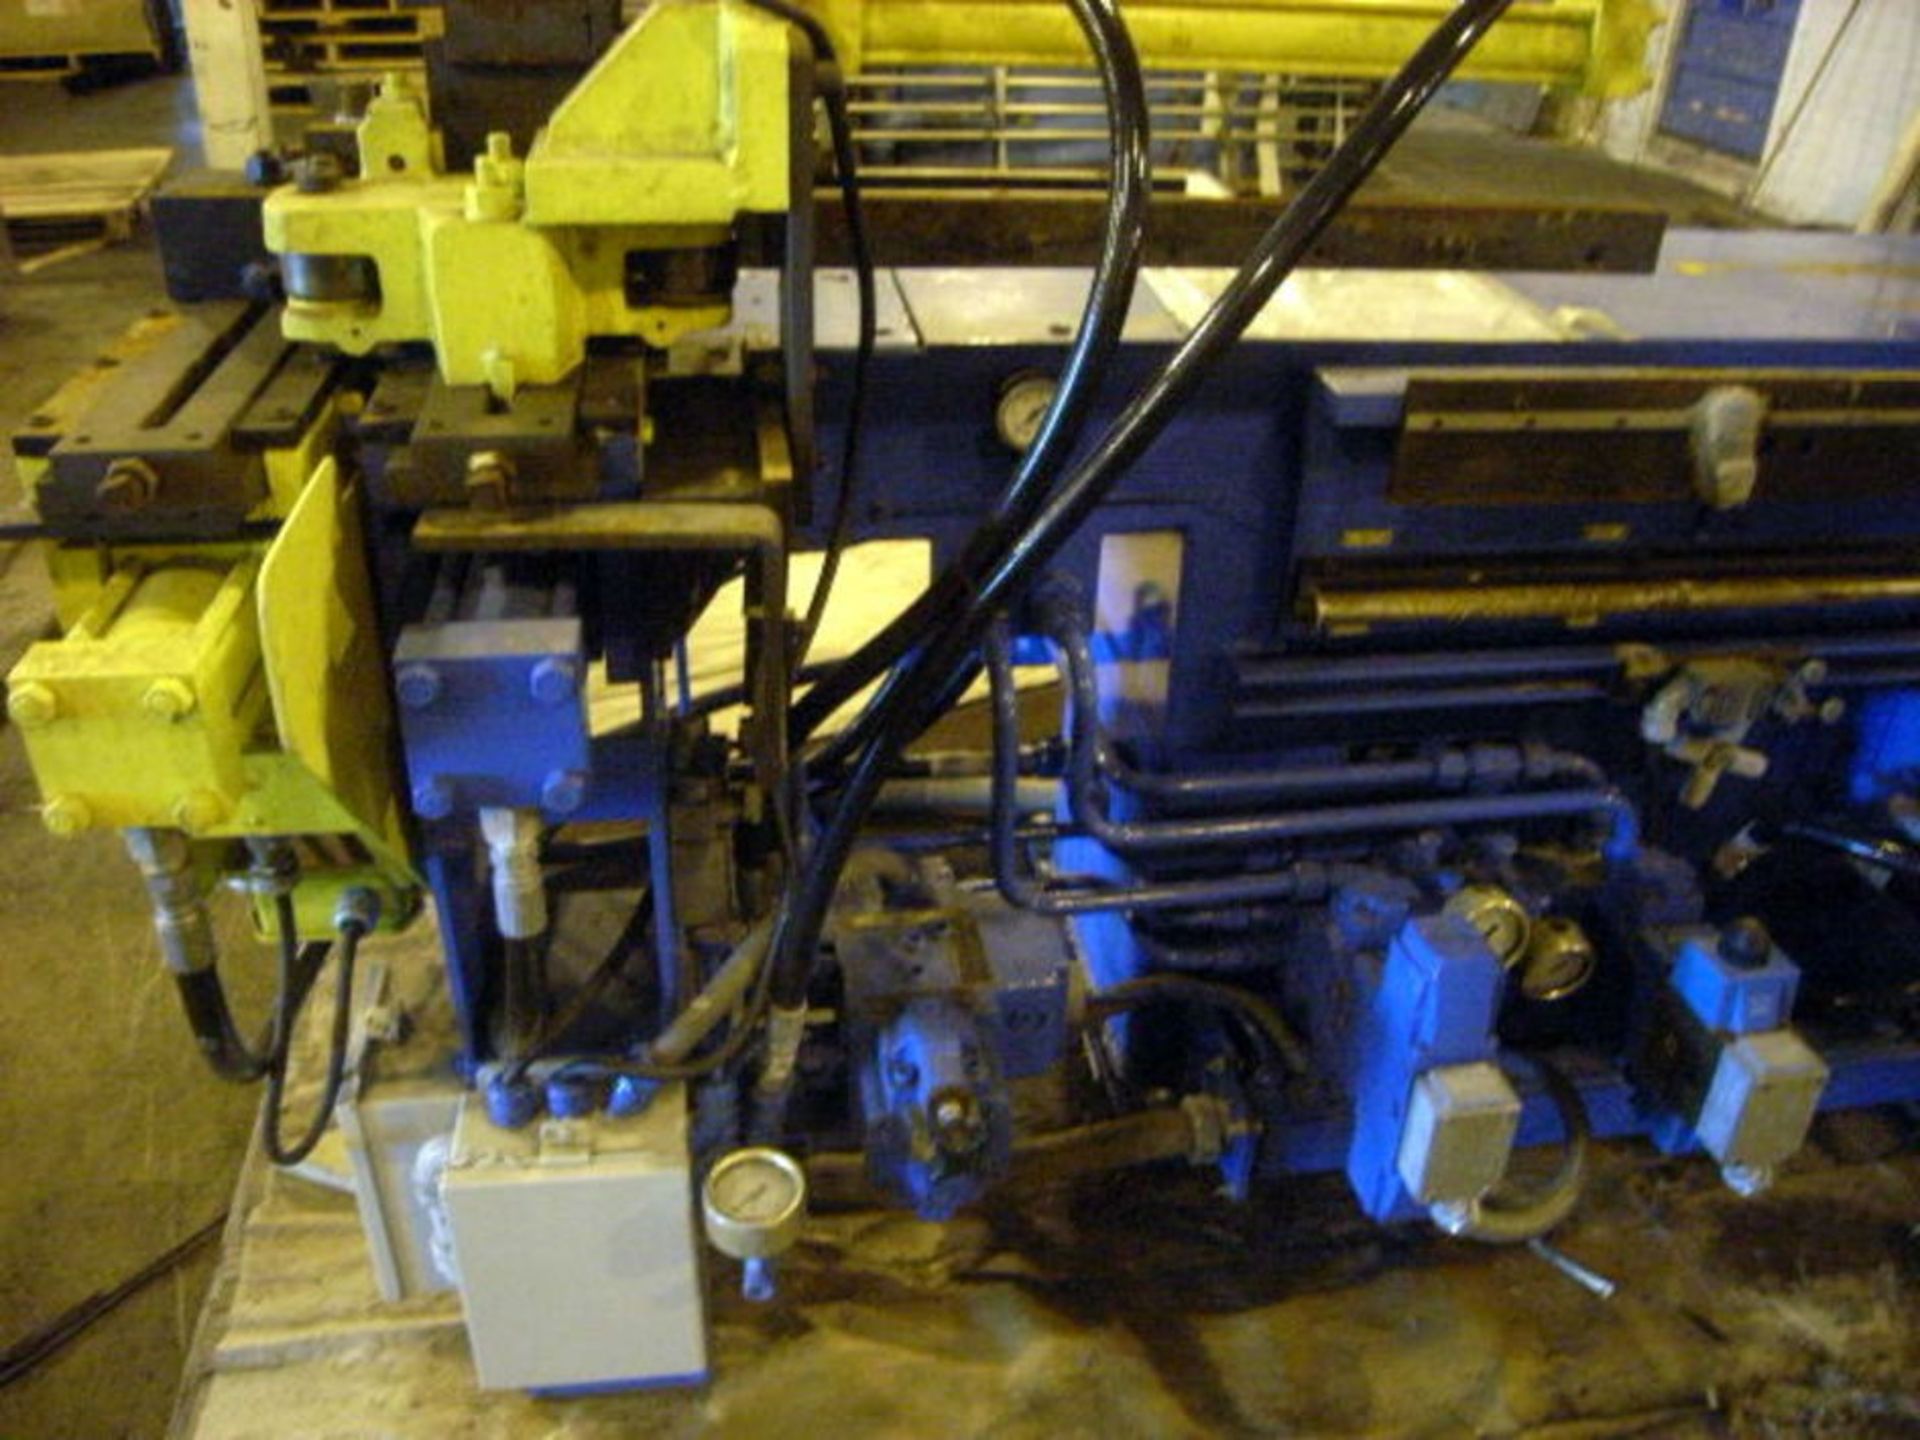 Pines Horizontal Hydraulic Tube Bender, 1 1/2" x 0.188", Mdl: #1 - Painesville, OH - 7116P - Image 10 of 35